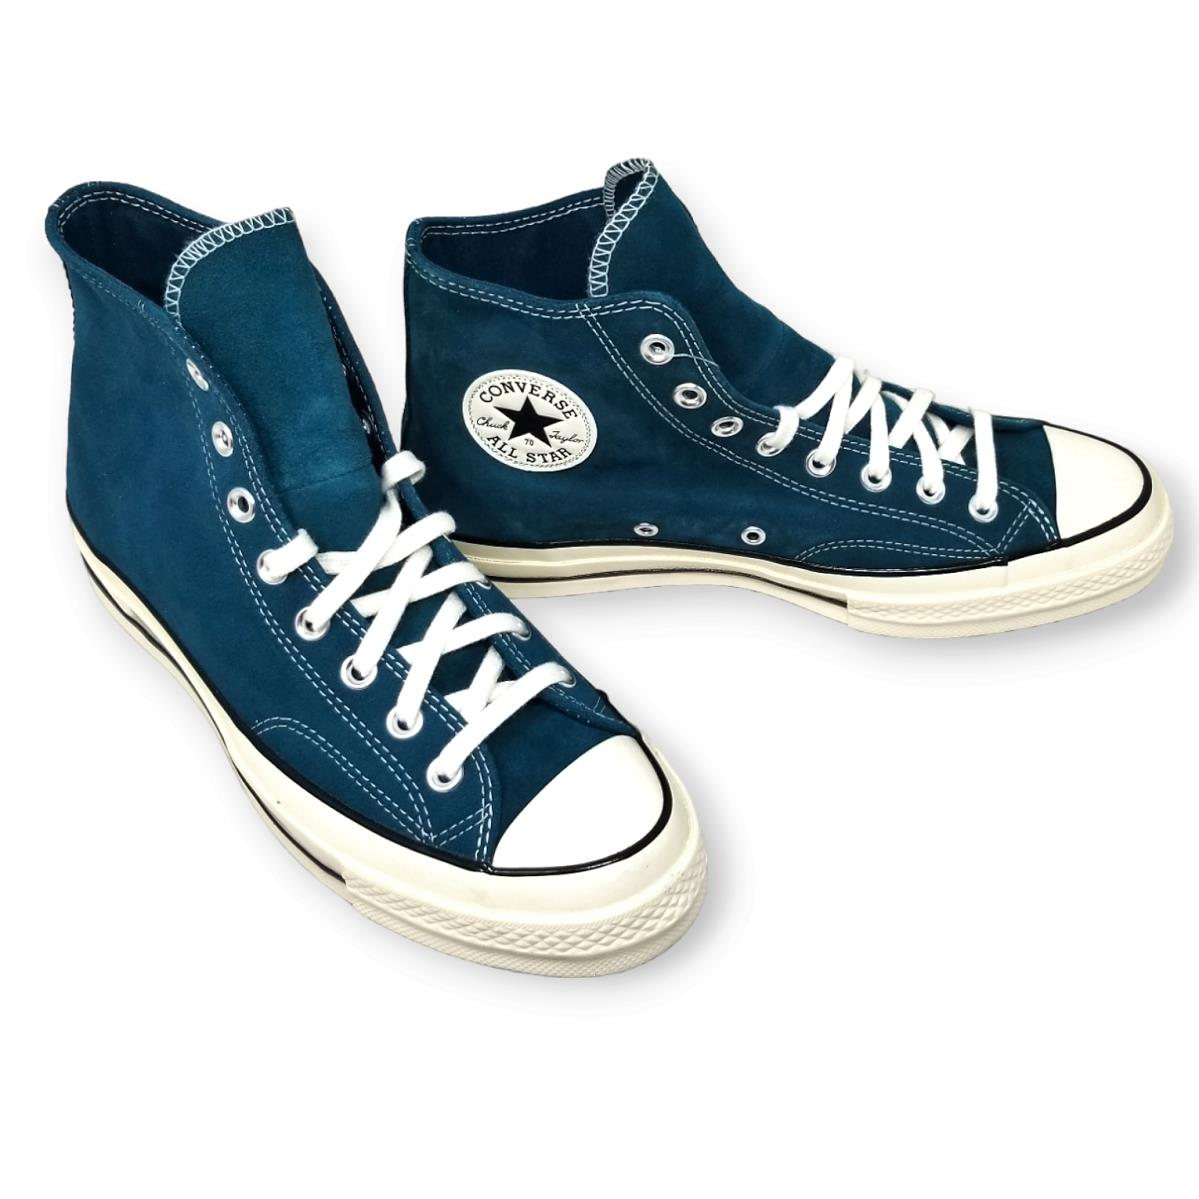 Converse Chuck 70 Hi High Top Midnight Turquoise Suede - 166214C